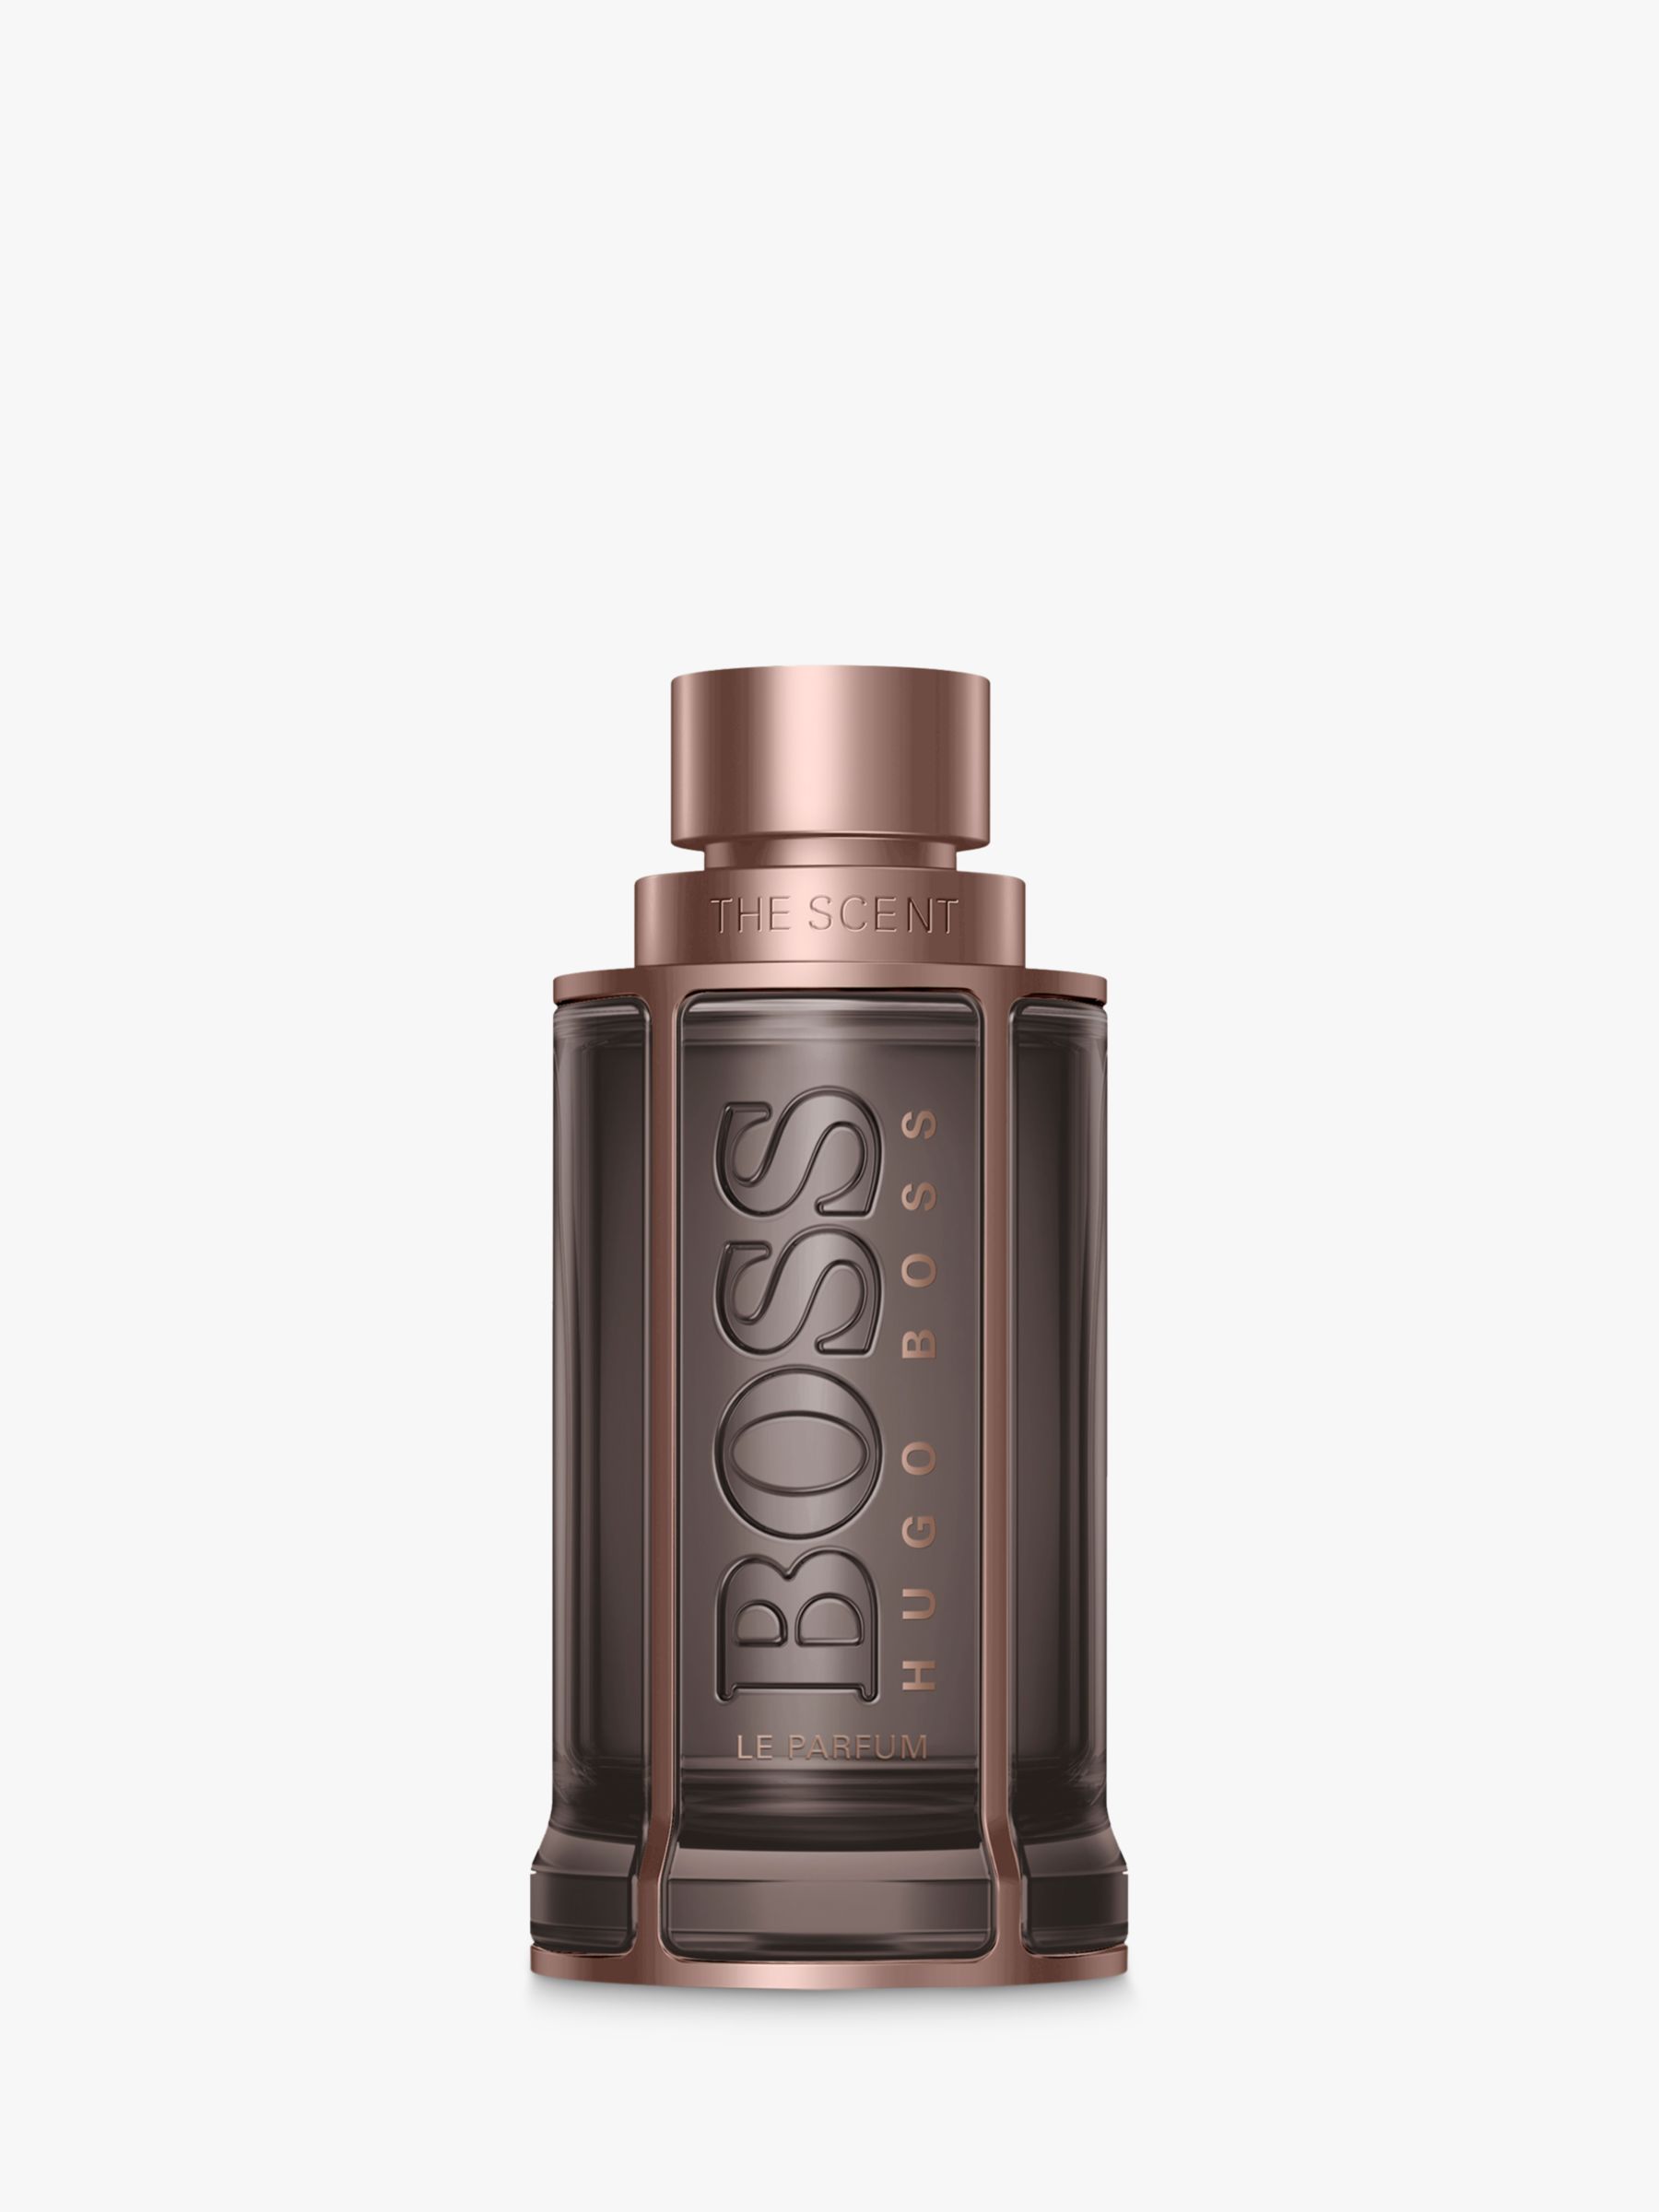 Hugo Boss The Scent John Lewis | peacecommission.kdsg.gov.ng